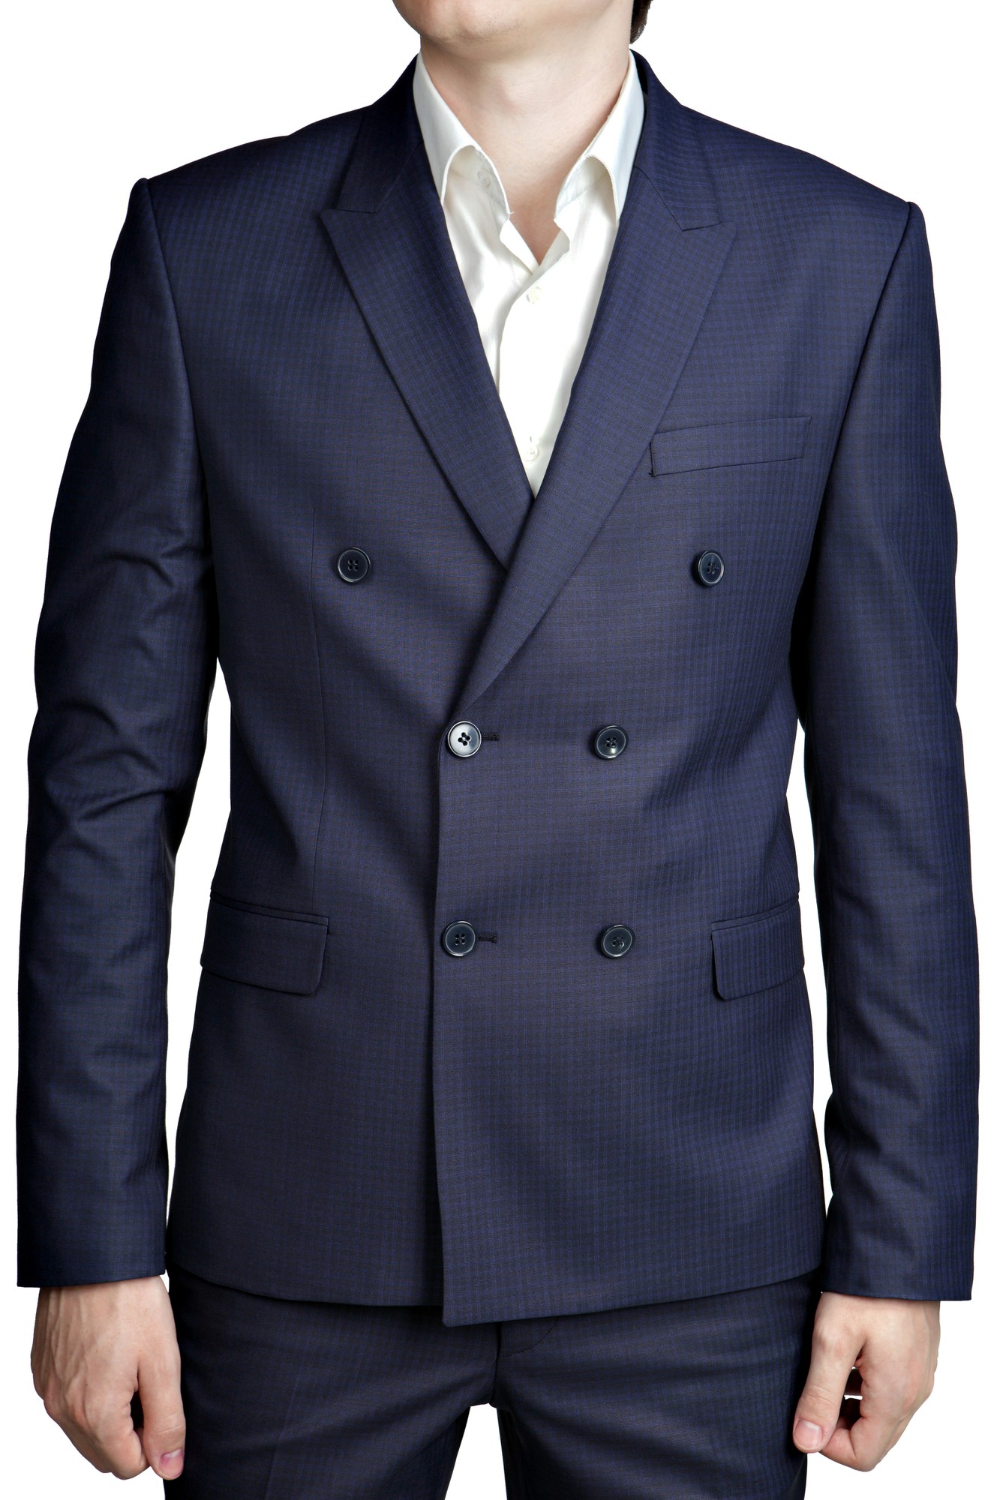 Double-breasted navy blue small checkered pattern suit